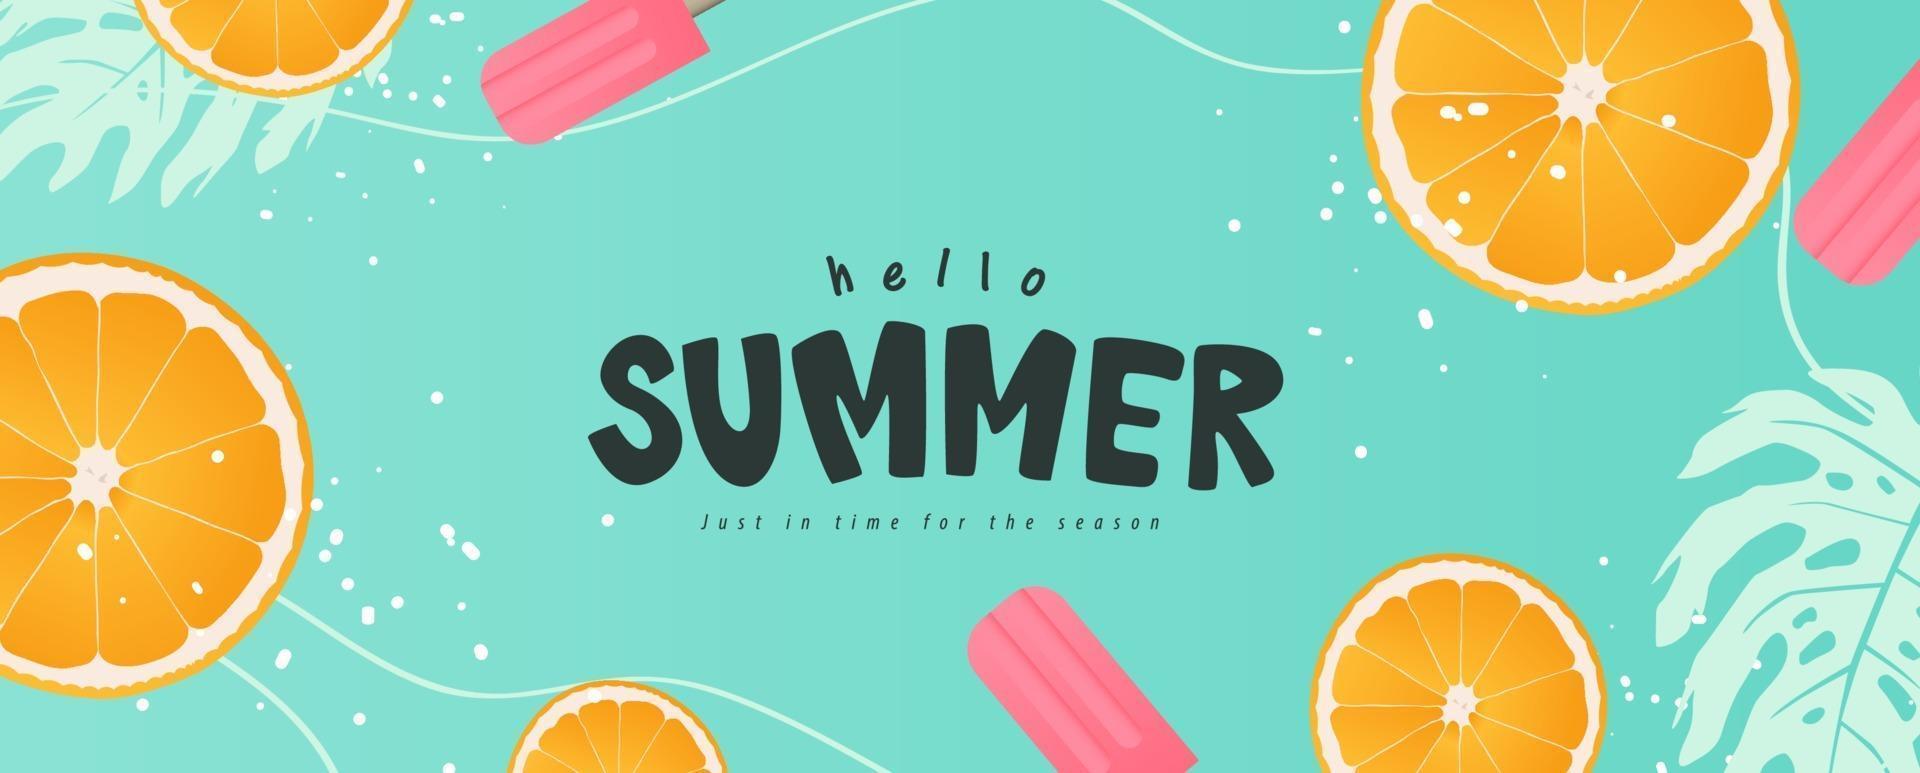 Colorful Summer background layout banners design. Horizontal poster, greeting card, header for website vector